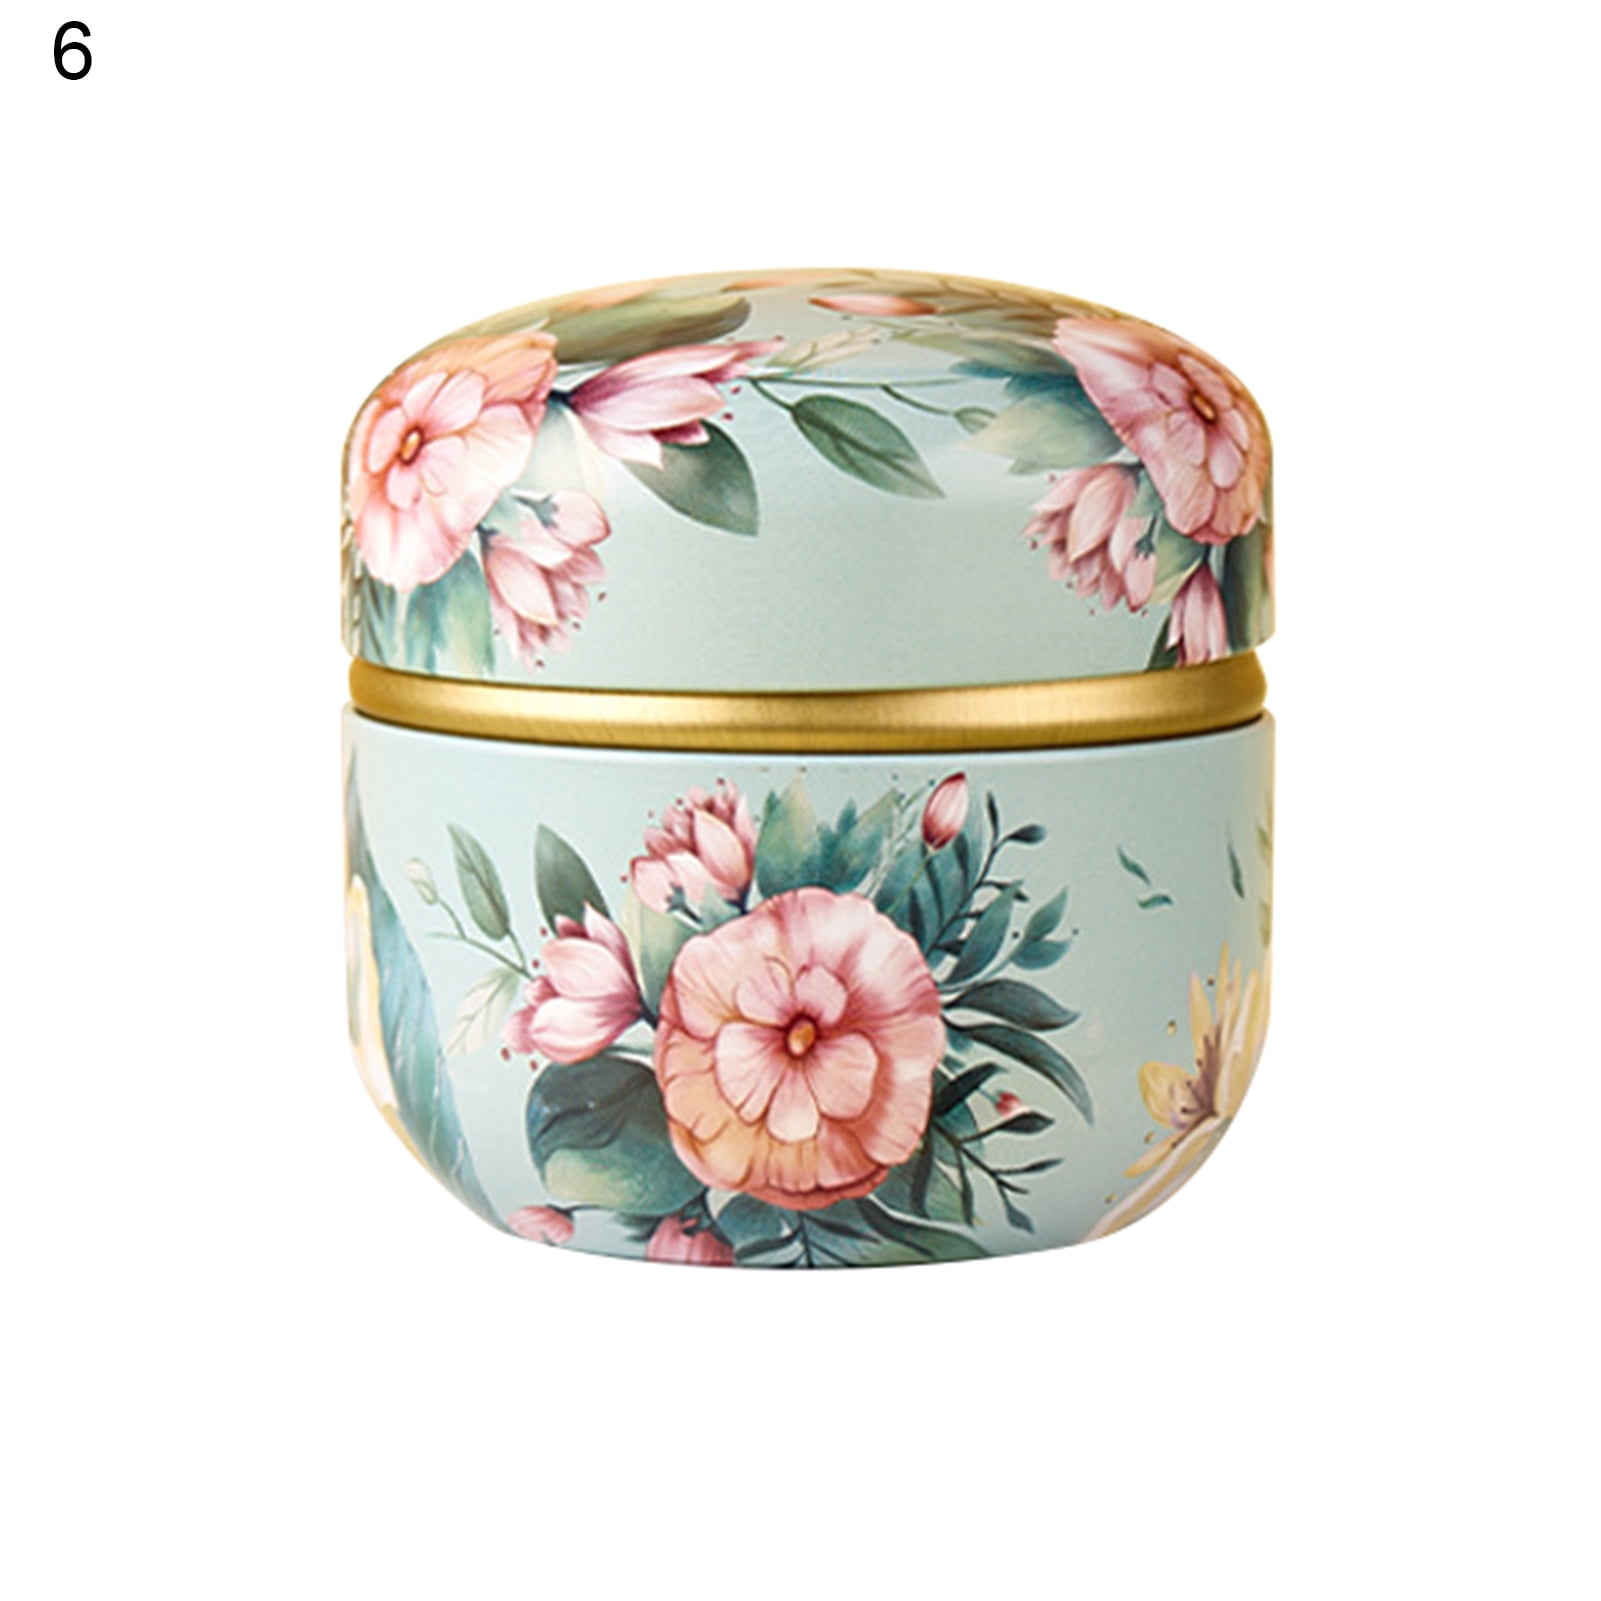  DreamsEden Small Storage Tin Box - Mini Metal Treasure Tea  Container Decorative Keepsake Case with Lid for Kids Girls Boys Gifts Home  Decorations : Home & Kitchen